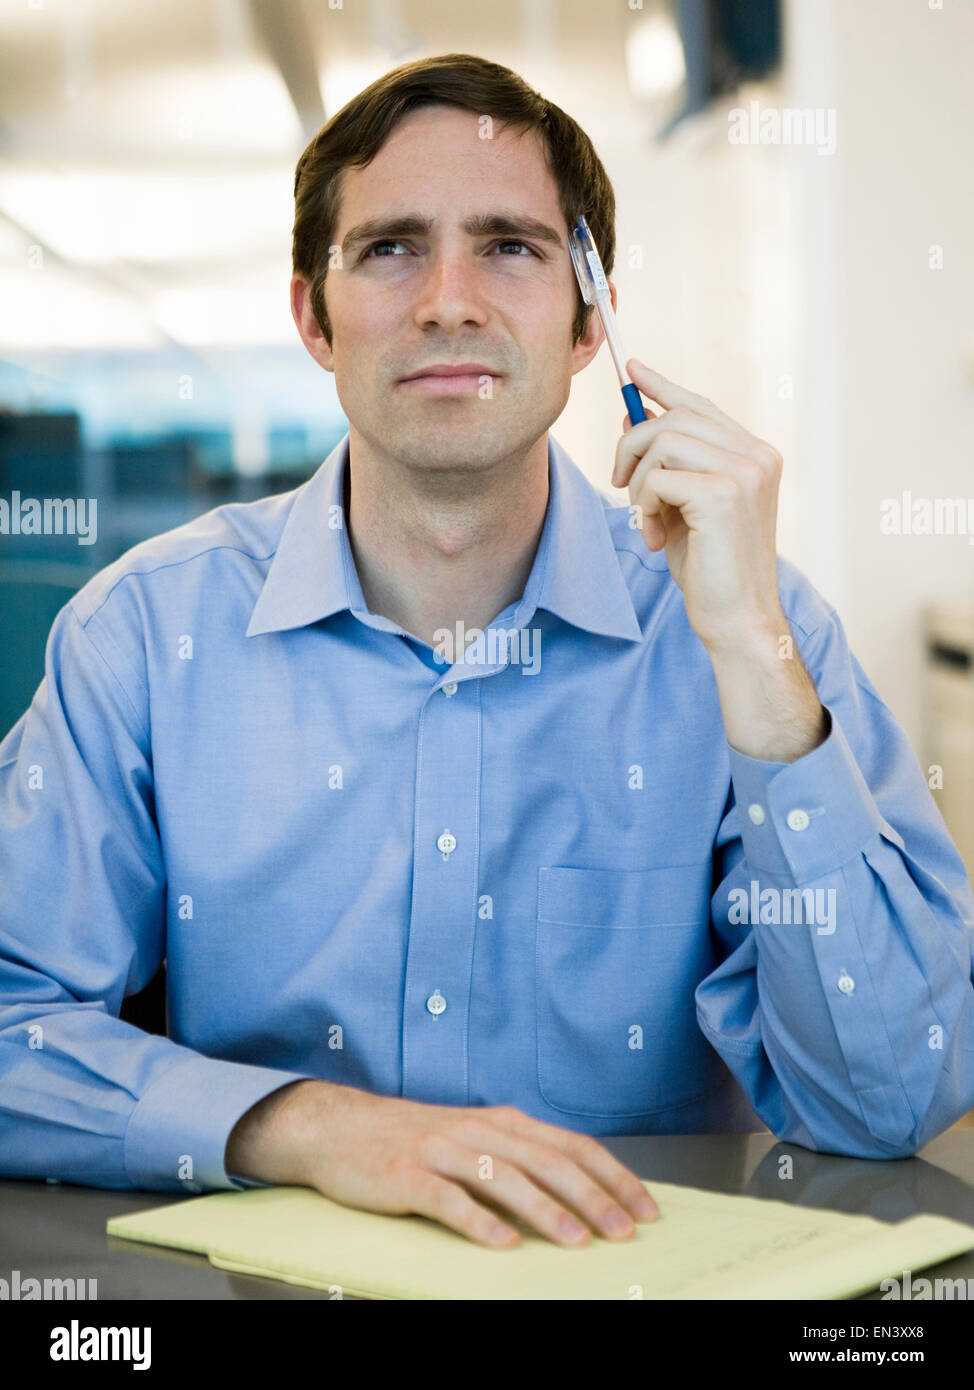 man in a blue shirt at work Stock Photo